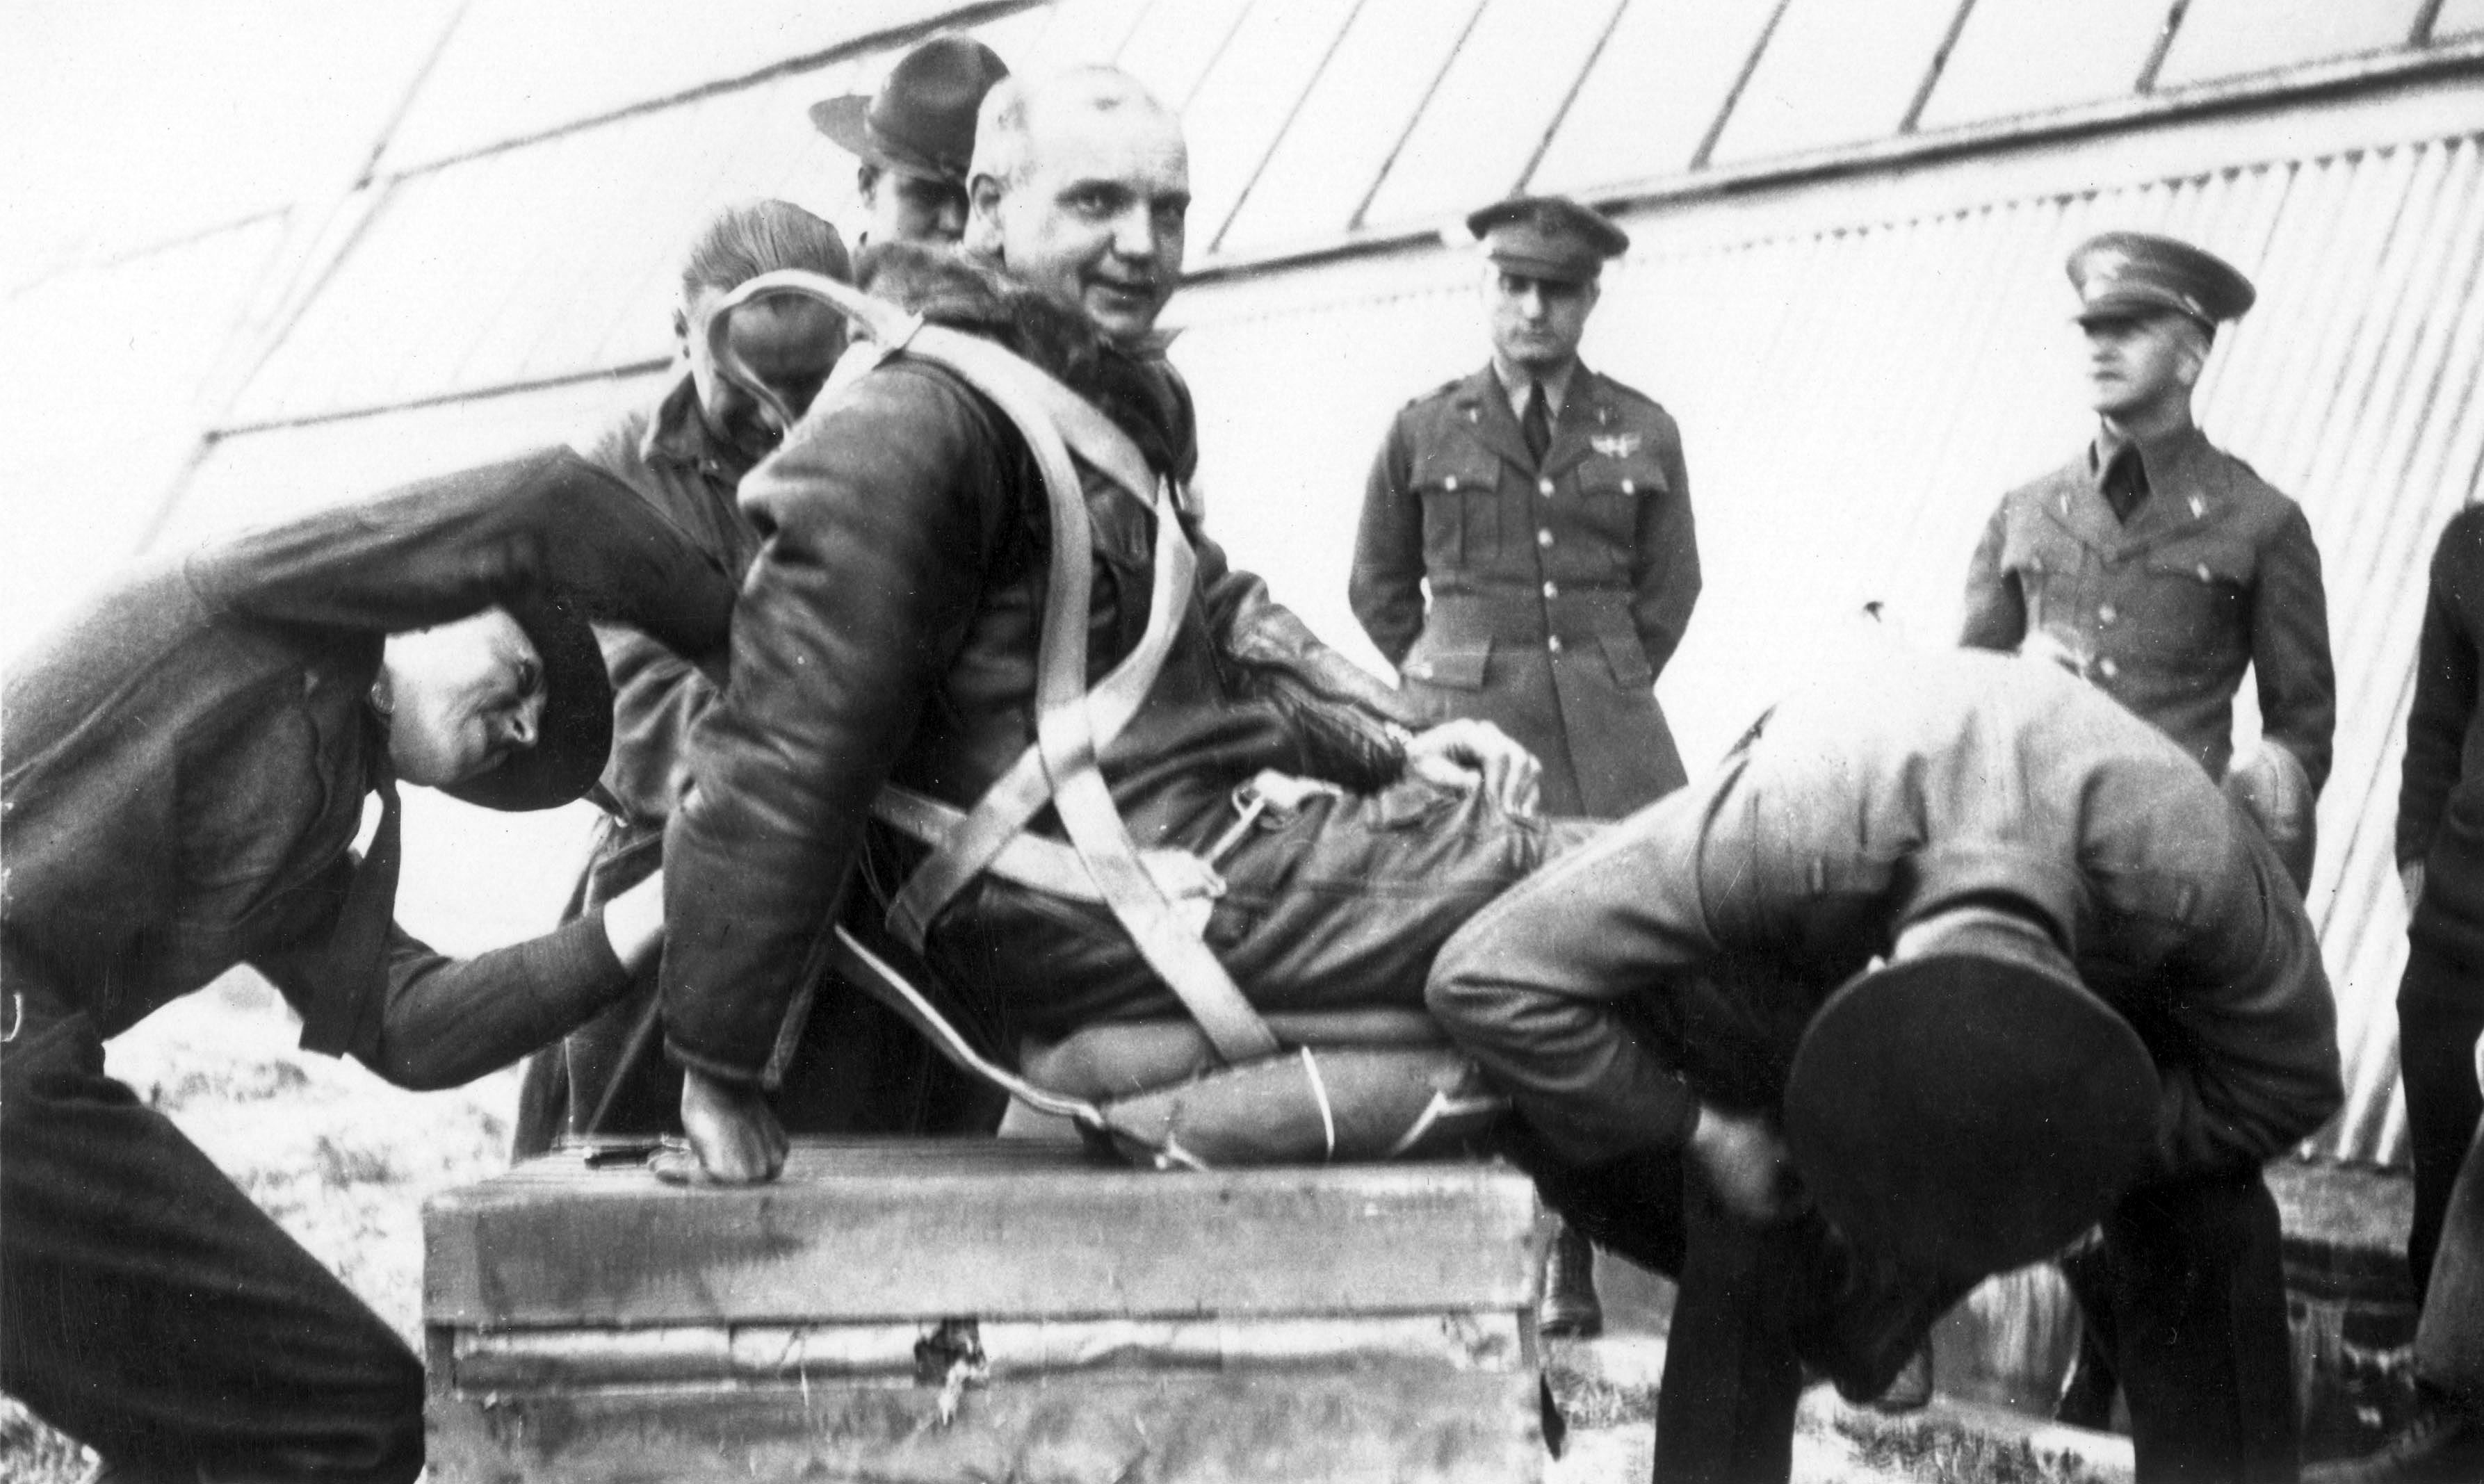 Captain Hawthorne C. Gray, U.S. Army Air Corps, preparing for his balloon ascent at Scott Field, Illinois, 4 November 1927. (U.S. Air Force)